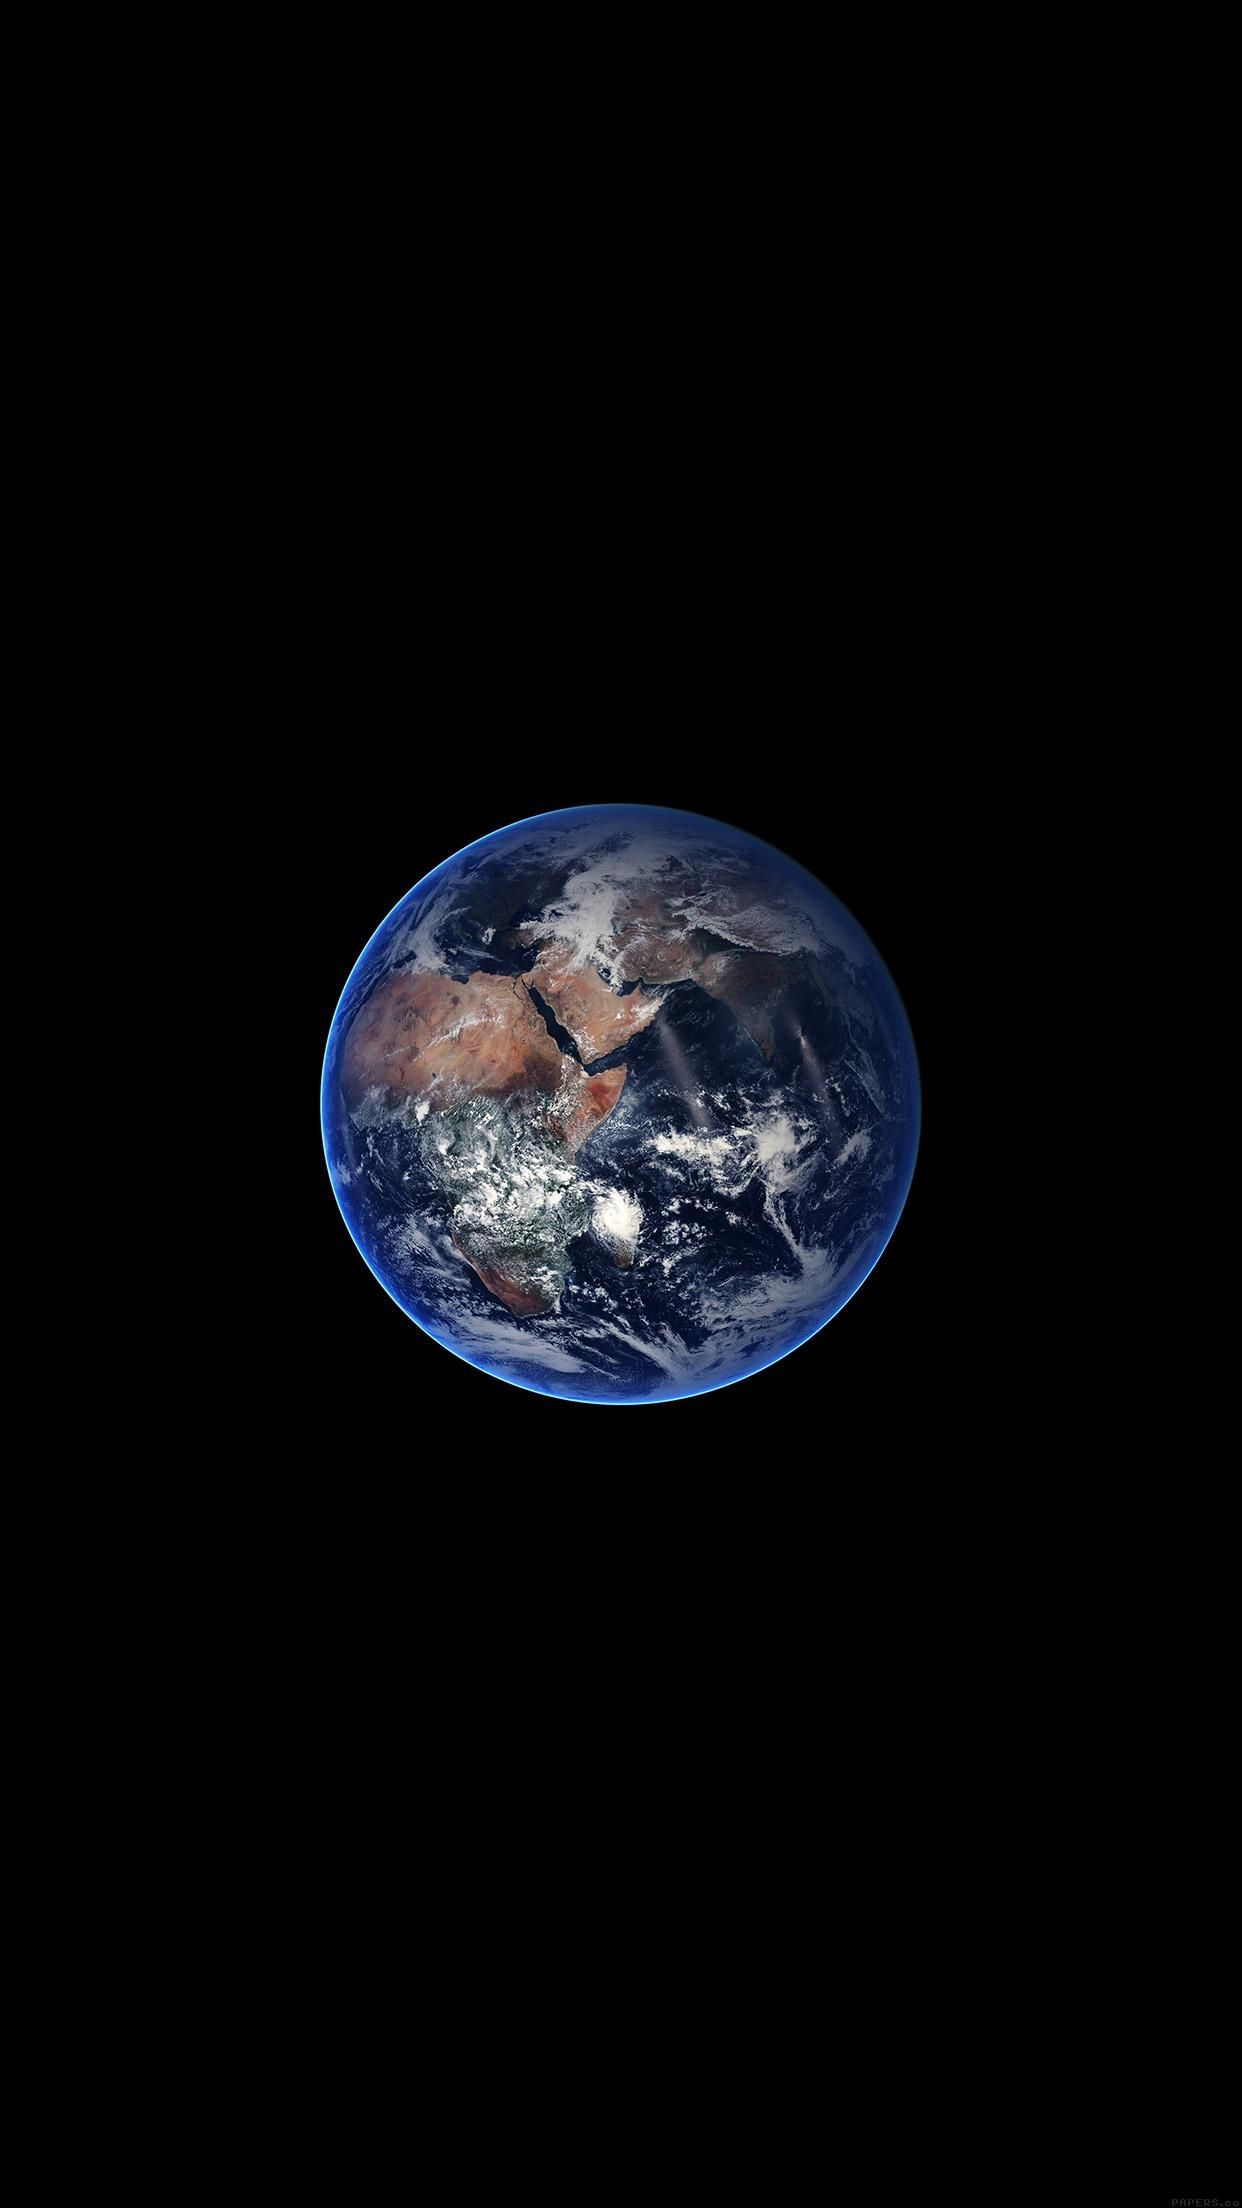 IPhone wallpaper of the earth - Earth